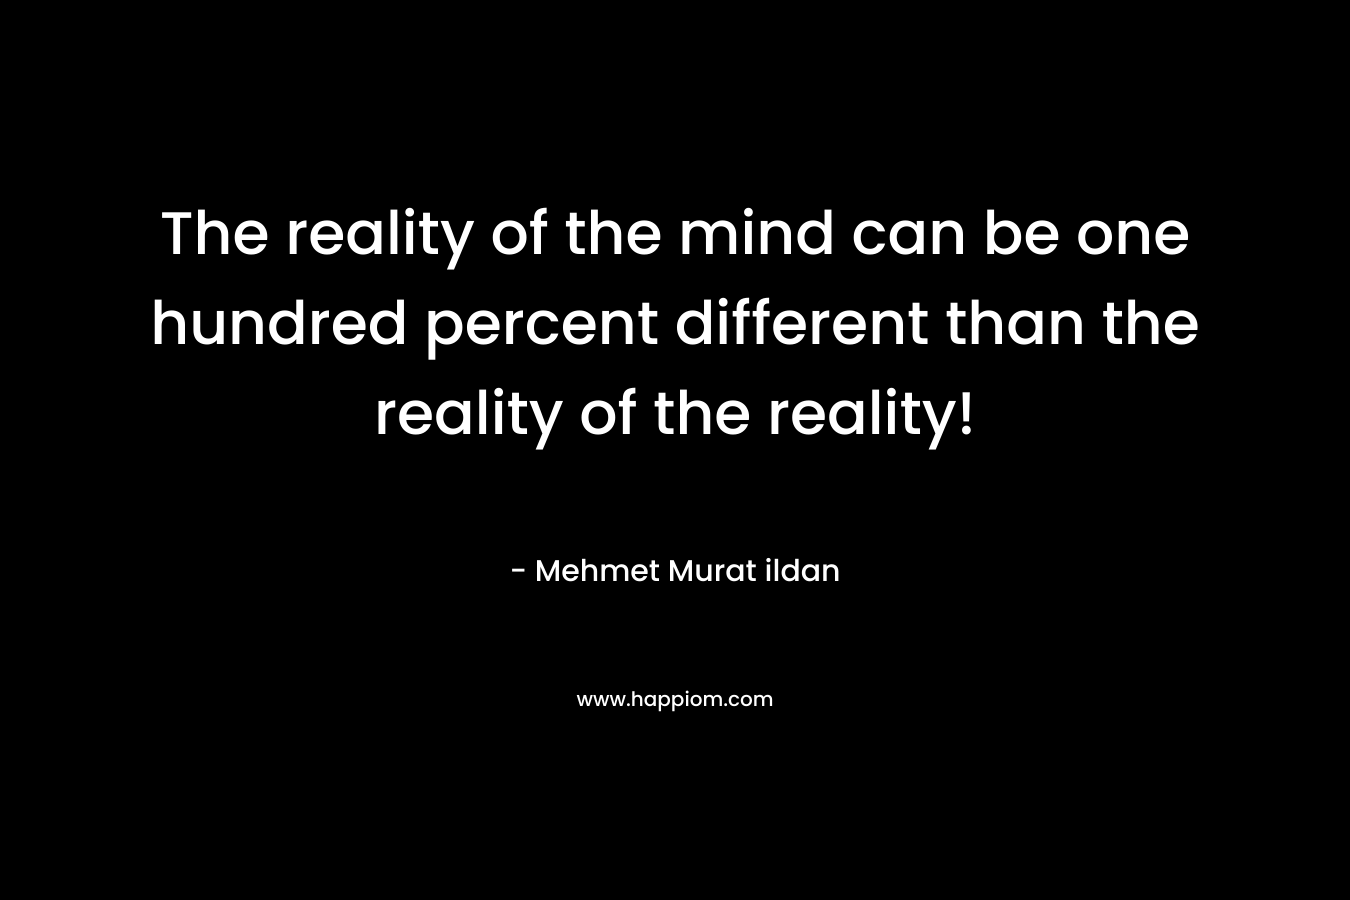 The reality of the mind can be one hundred percent different than the reality of the reality!